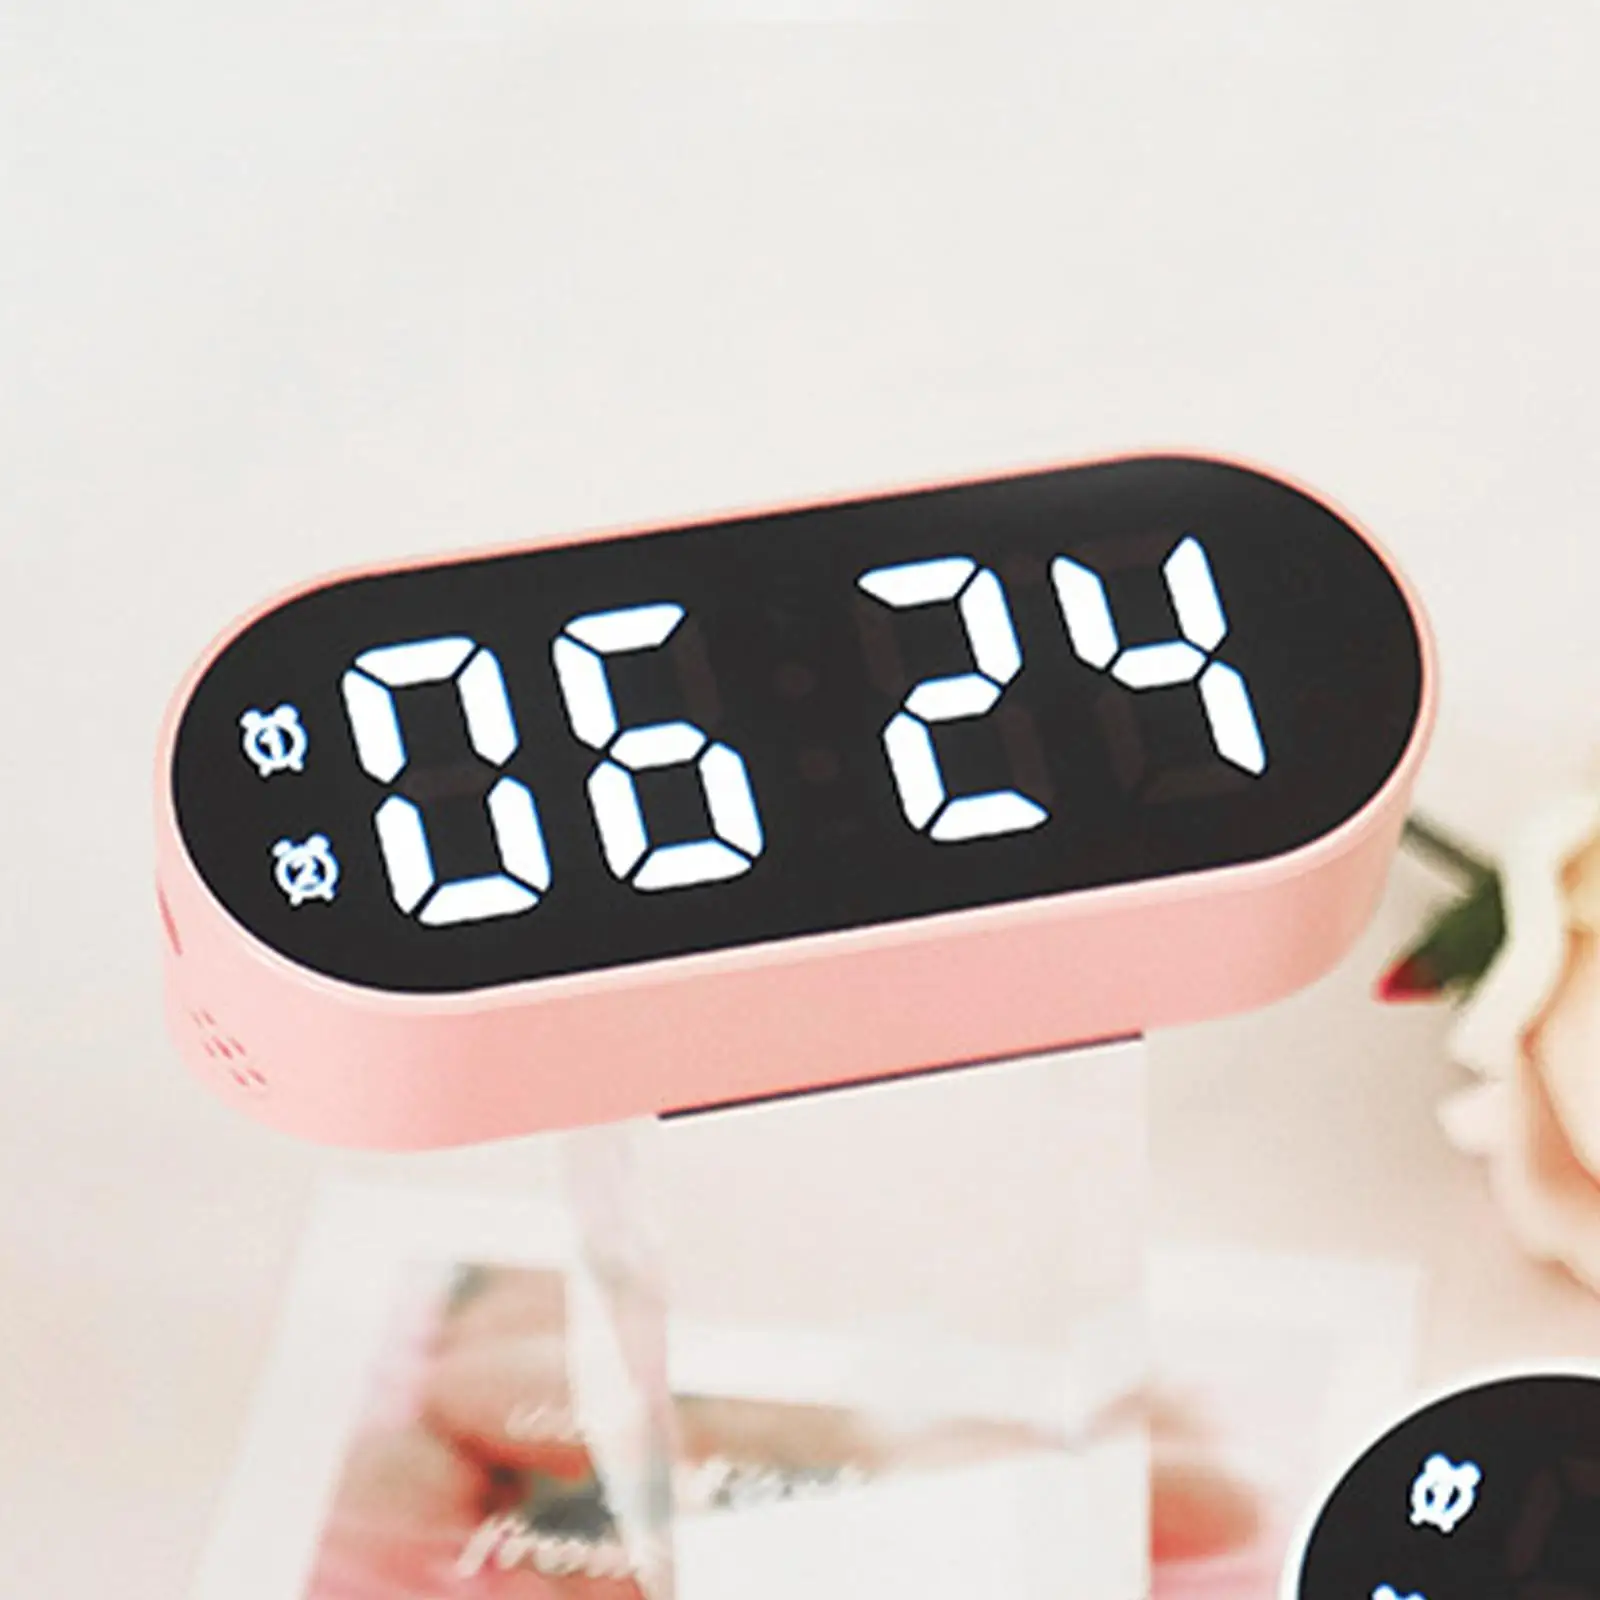 Digital Alarm Clock Large Display LED Electronic Clock Rechargeable with Temperature Date for Desk Indoor Bedside Kids